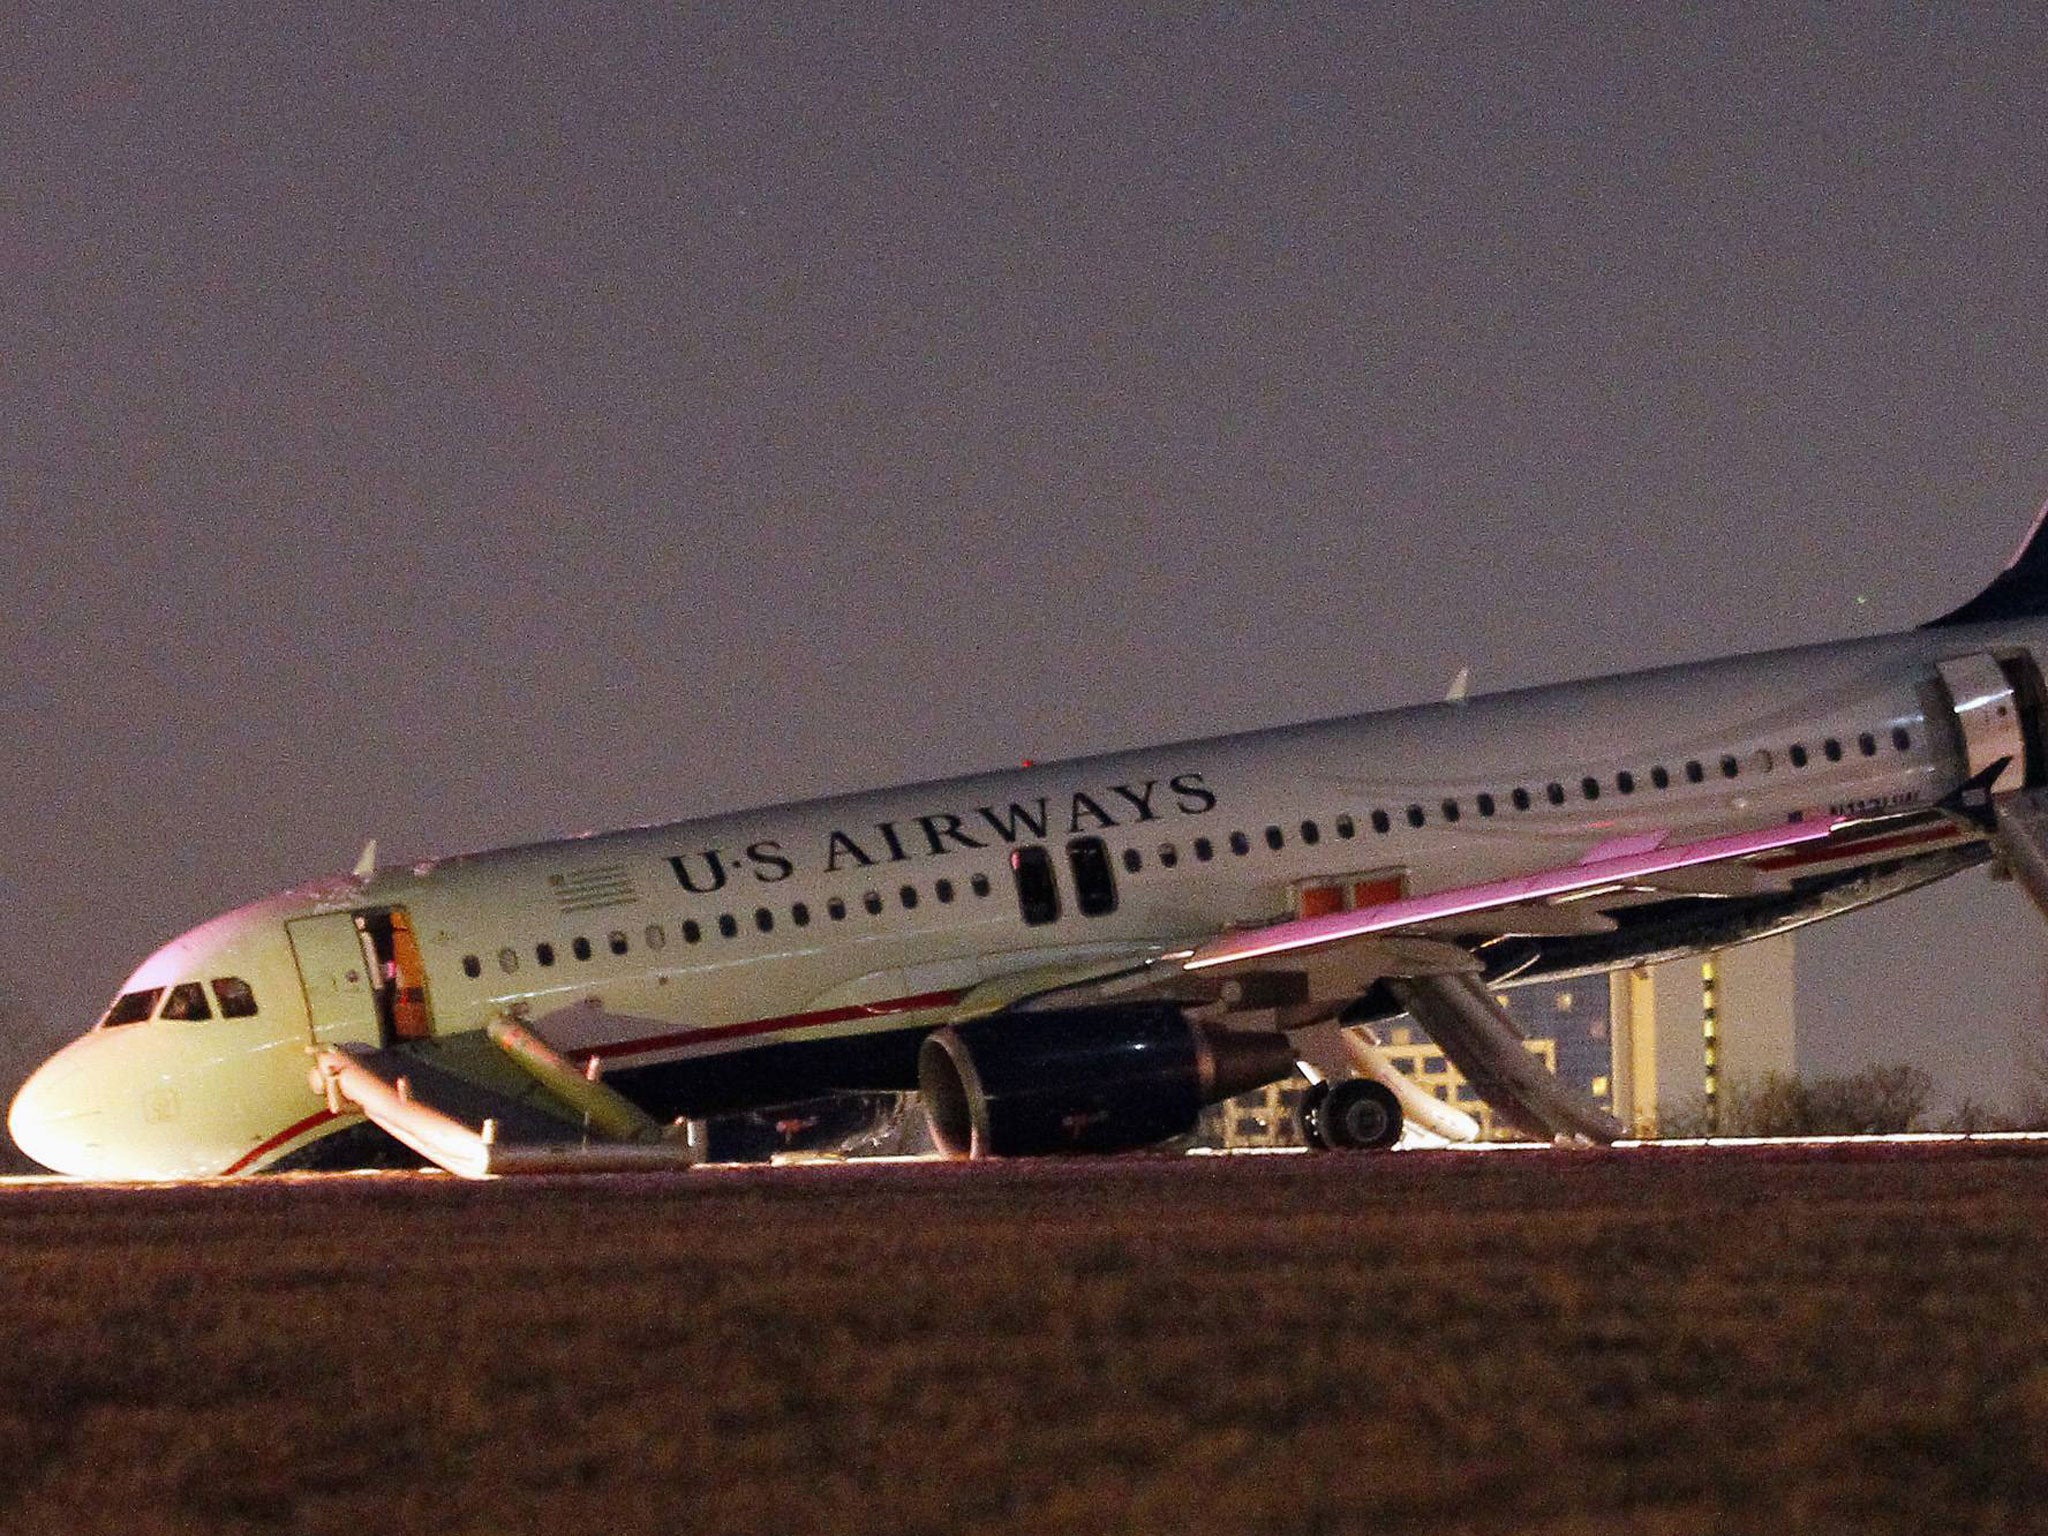 The USAirways plane's nose gear collapsed as the pilot reacted to a tyre bursting during take-off at Philadelphia International Airport